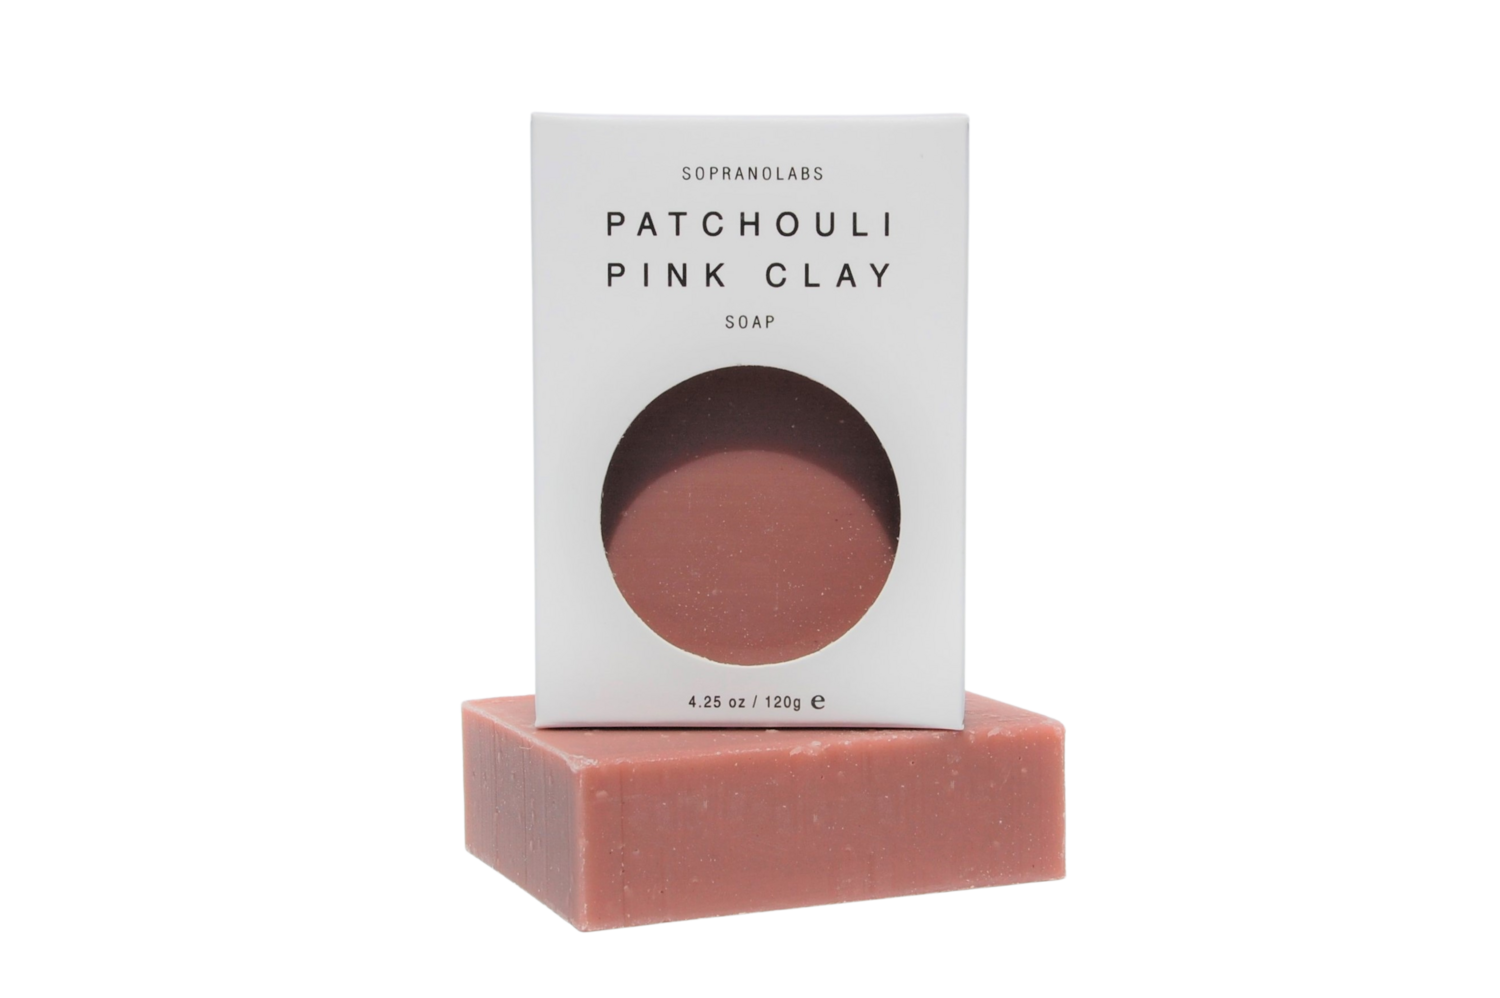 SopranoLabs Patchouli Pink Clay Soap Bar